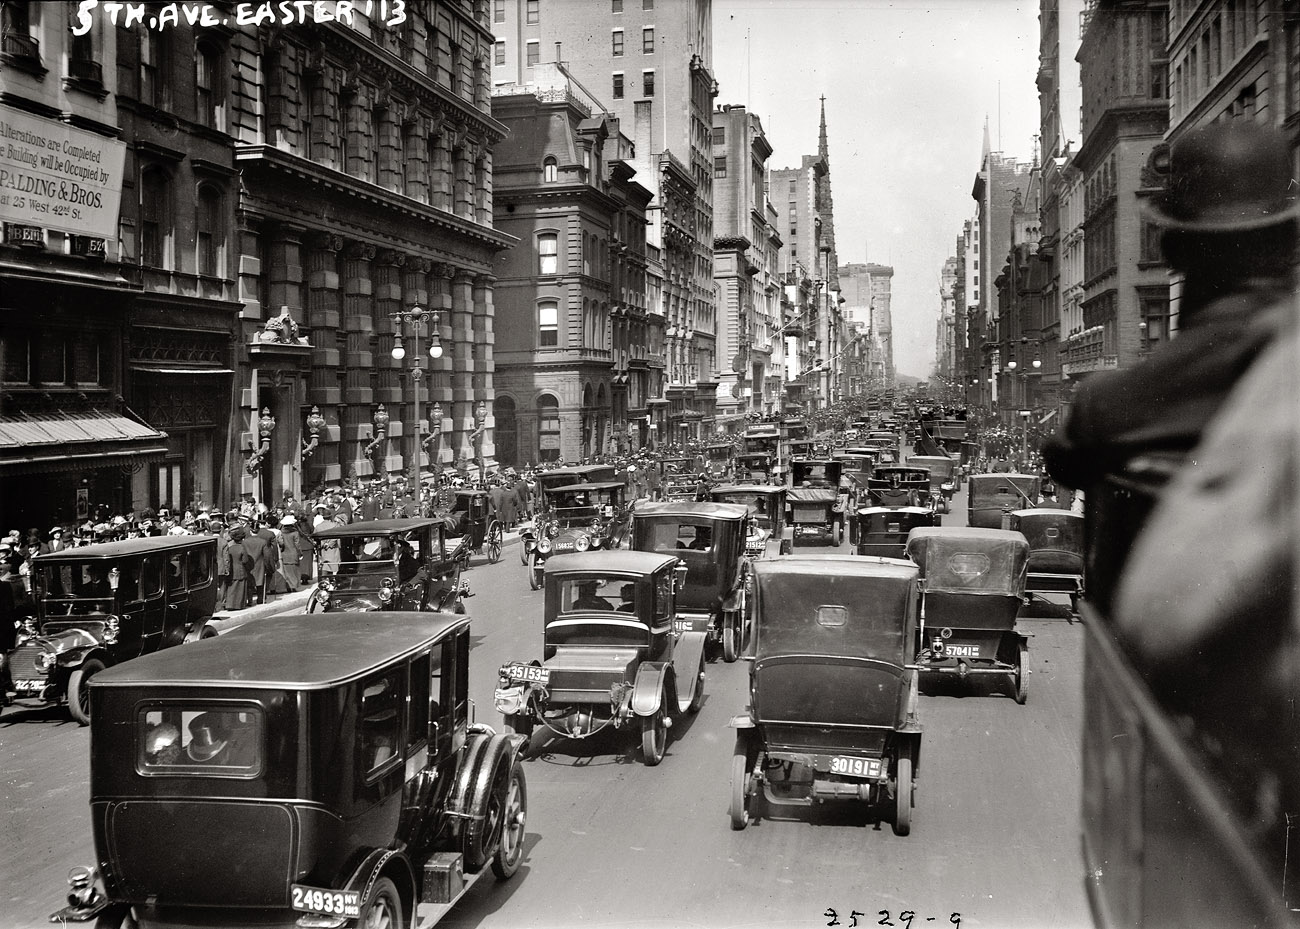 Easter 1913, New York. Fifth Avenue looking north. George Grantham Bain Collection. View full size.